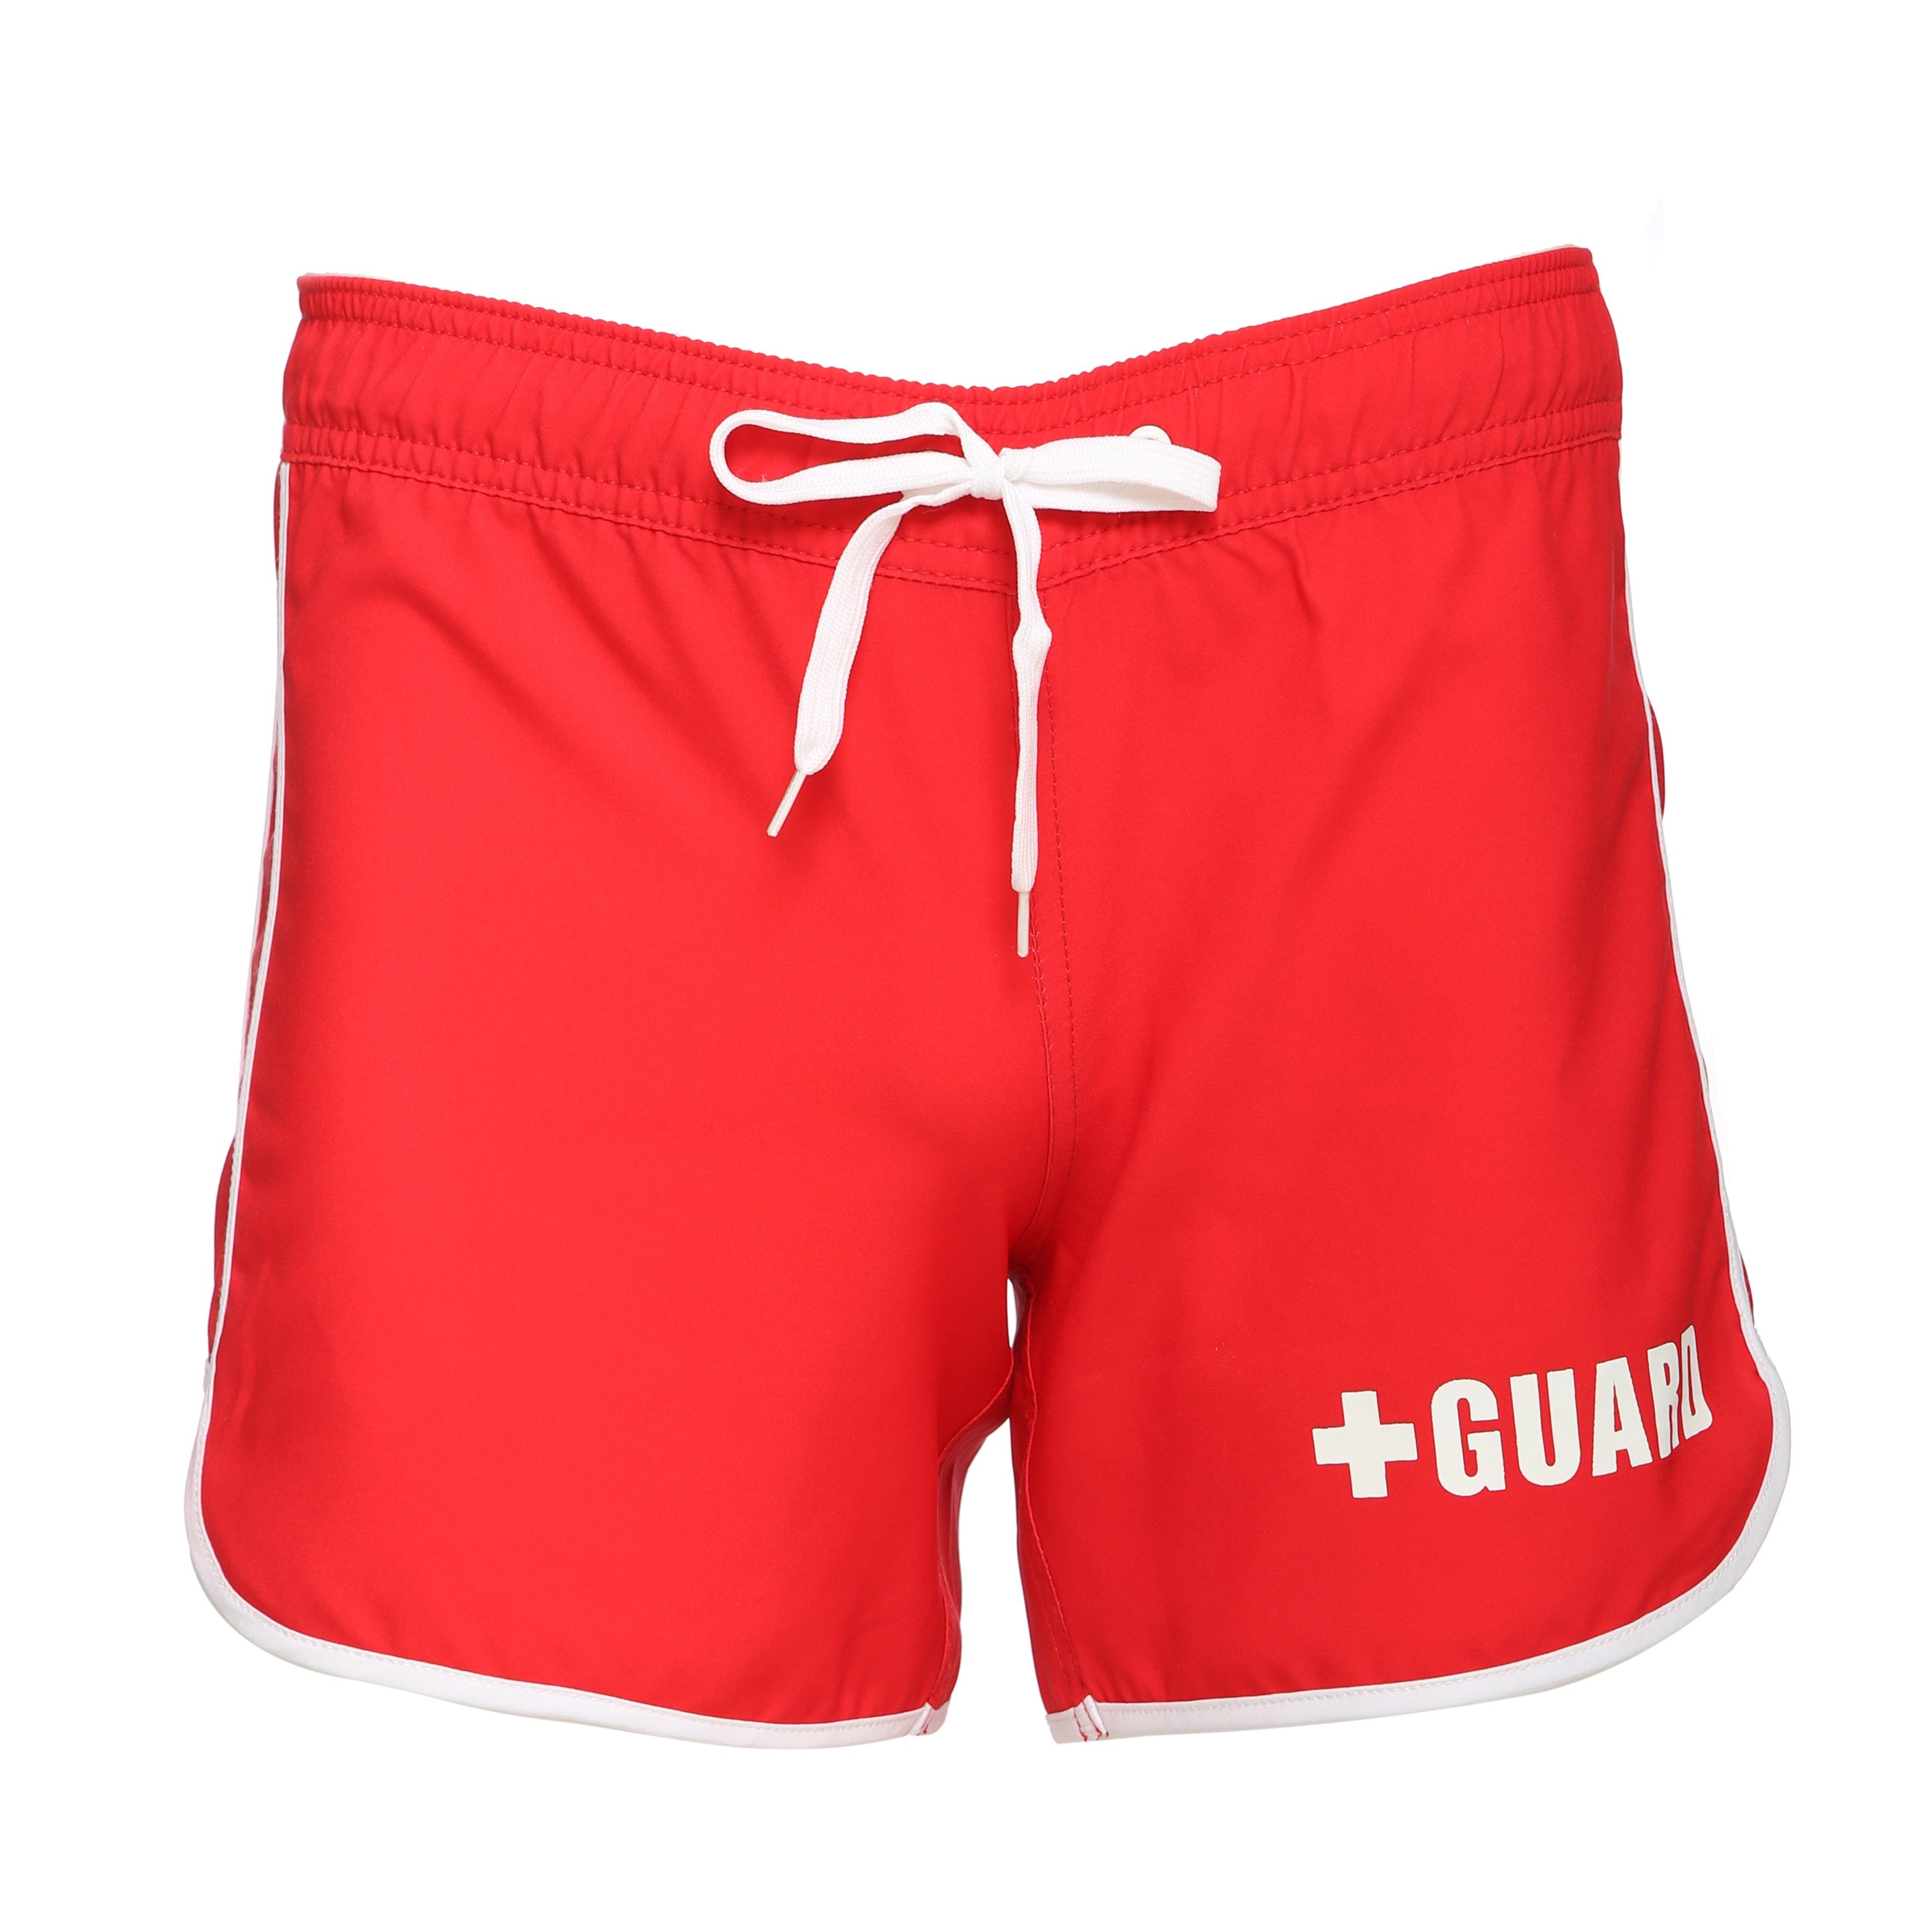 Lifeguard Swimsuit with Adjustable Straps 1pc with cups